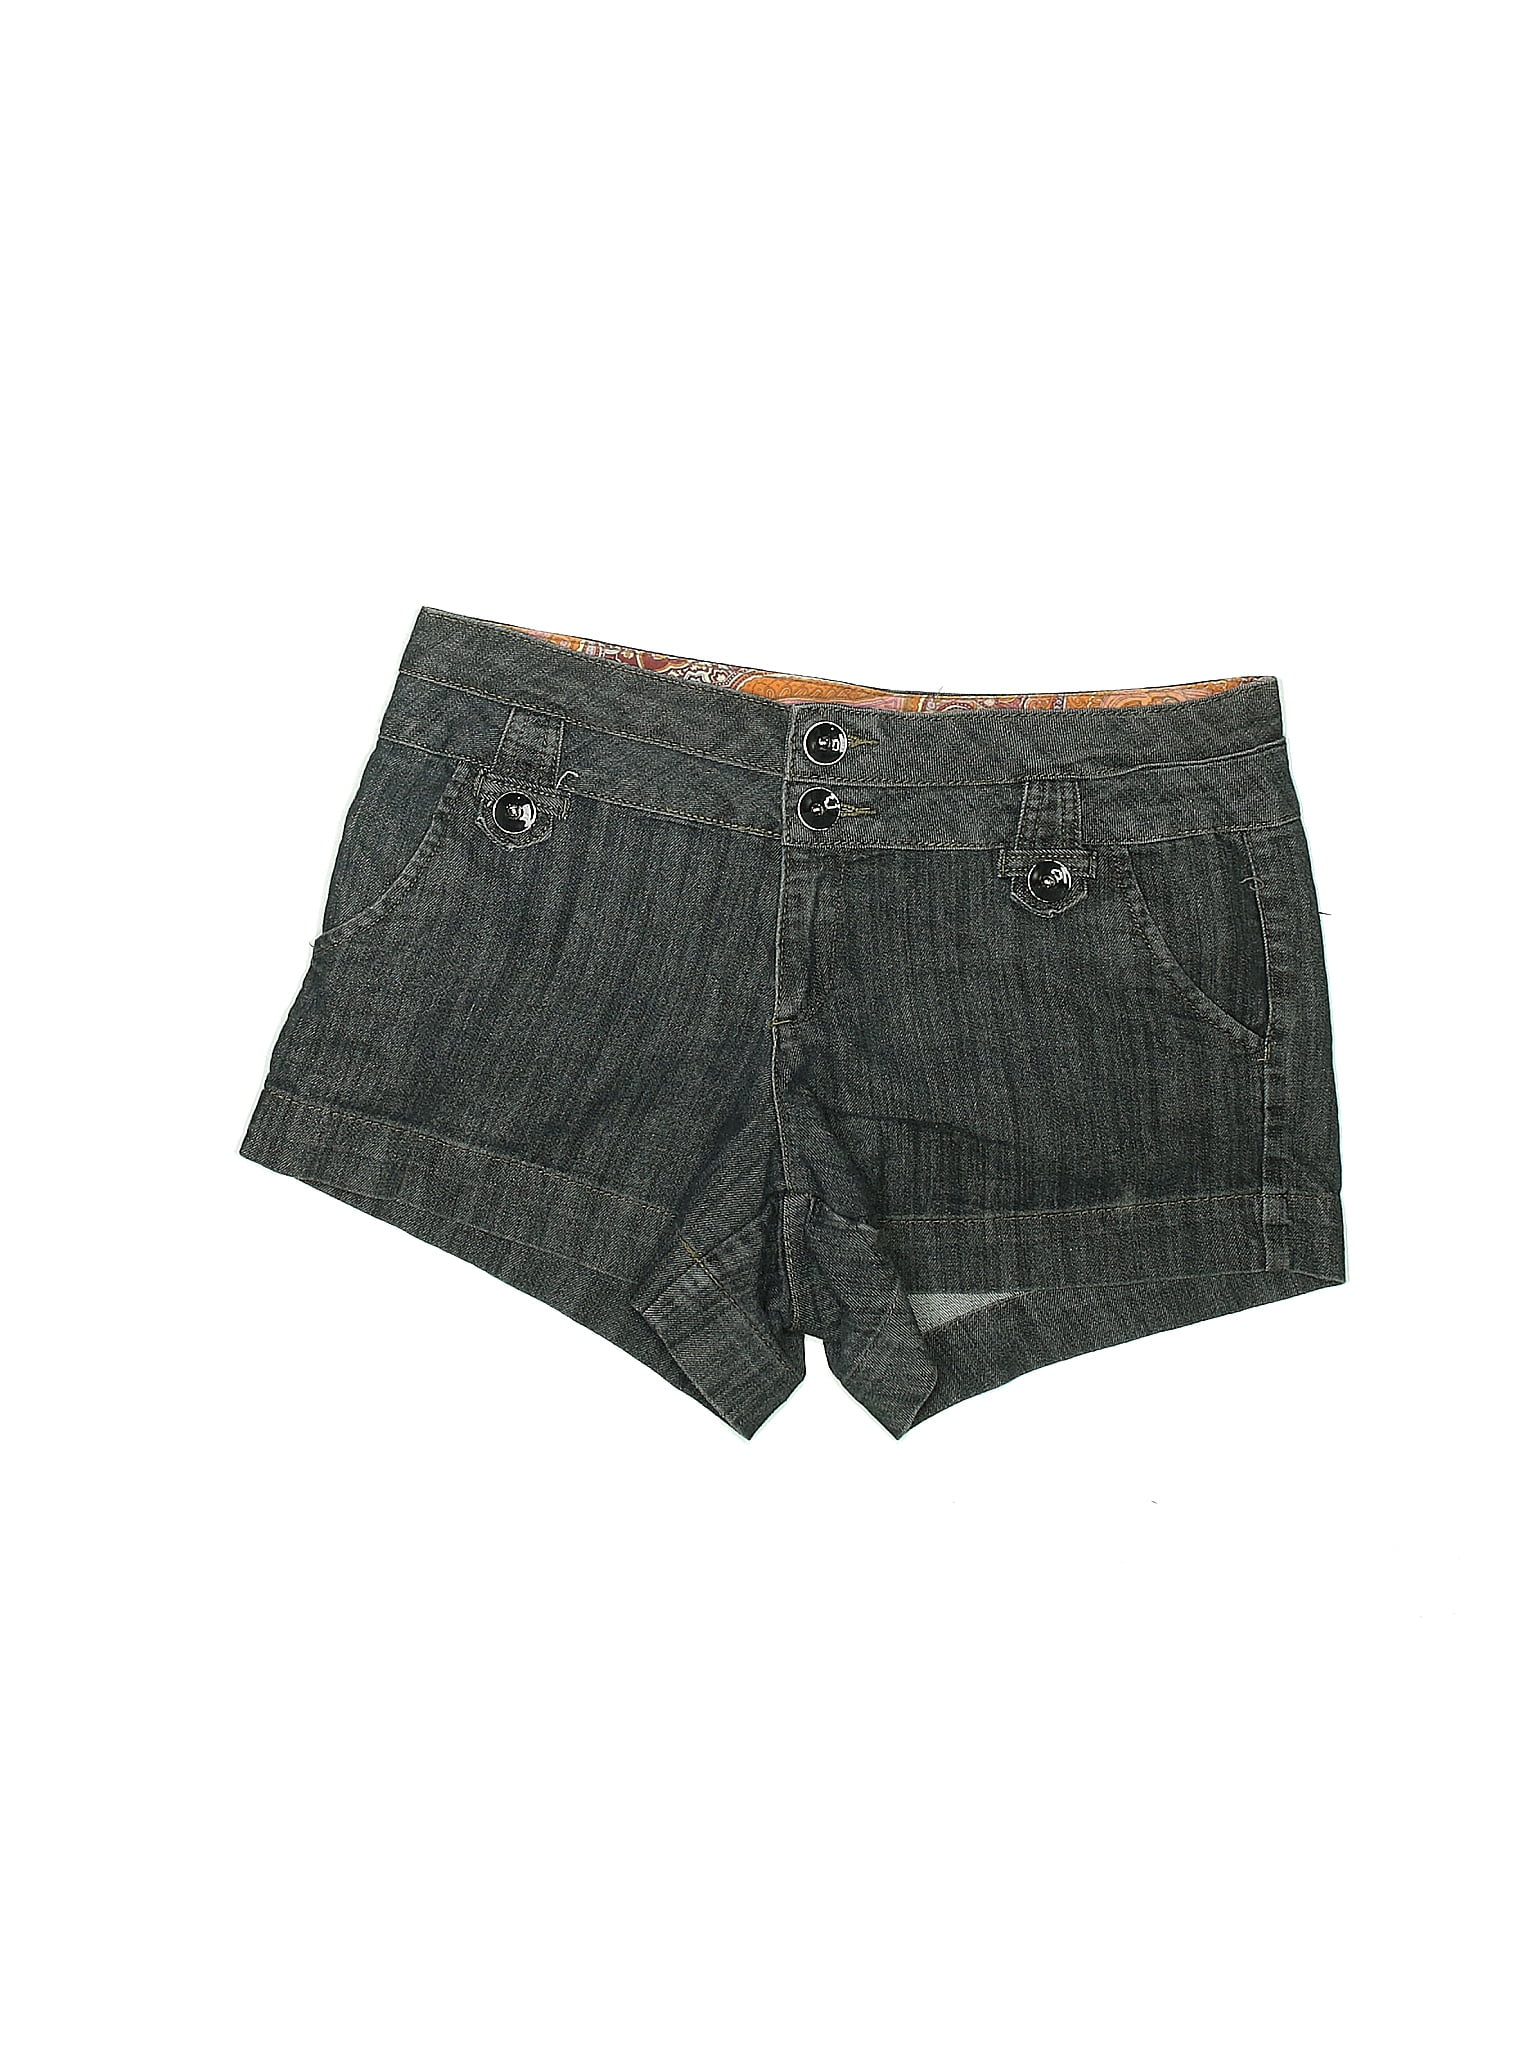 One 5 One Solid Gray Denim Shorts Size 14 - 37% off